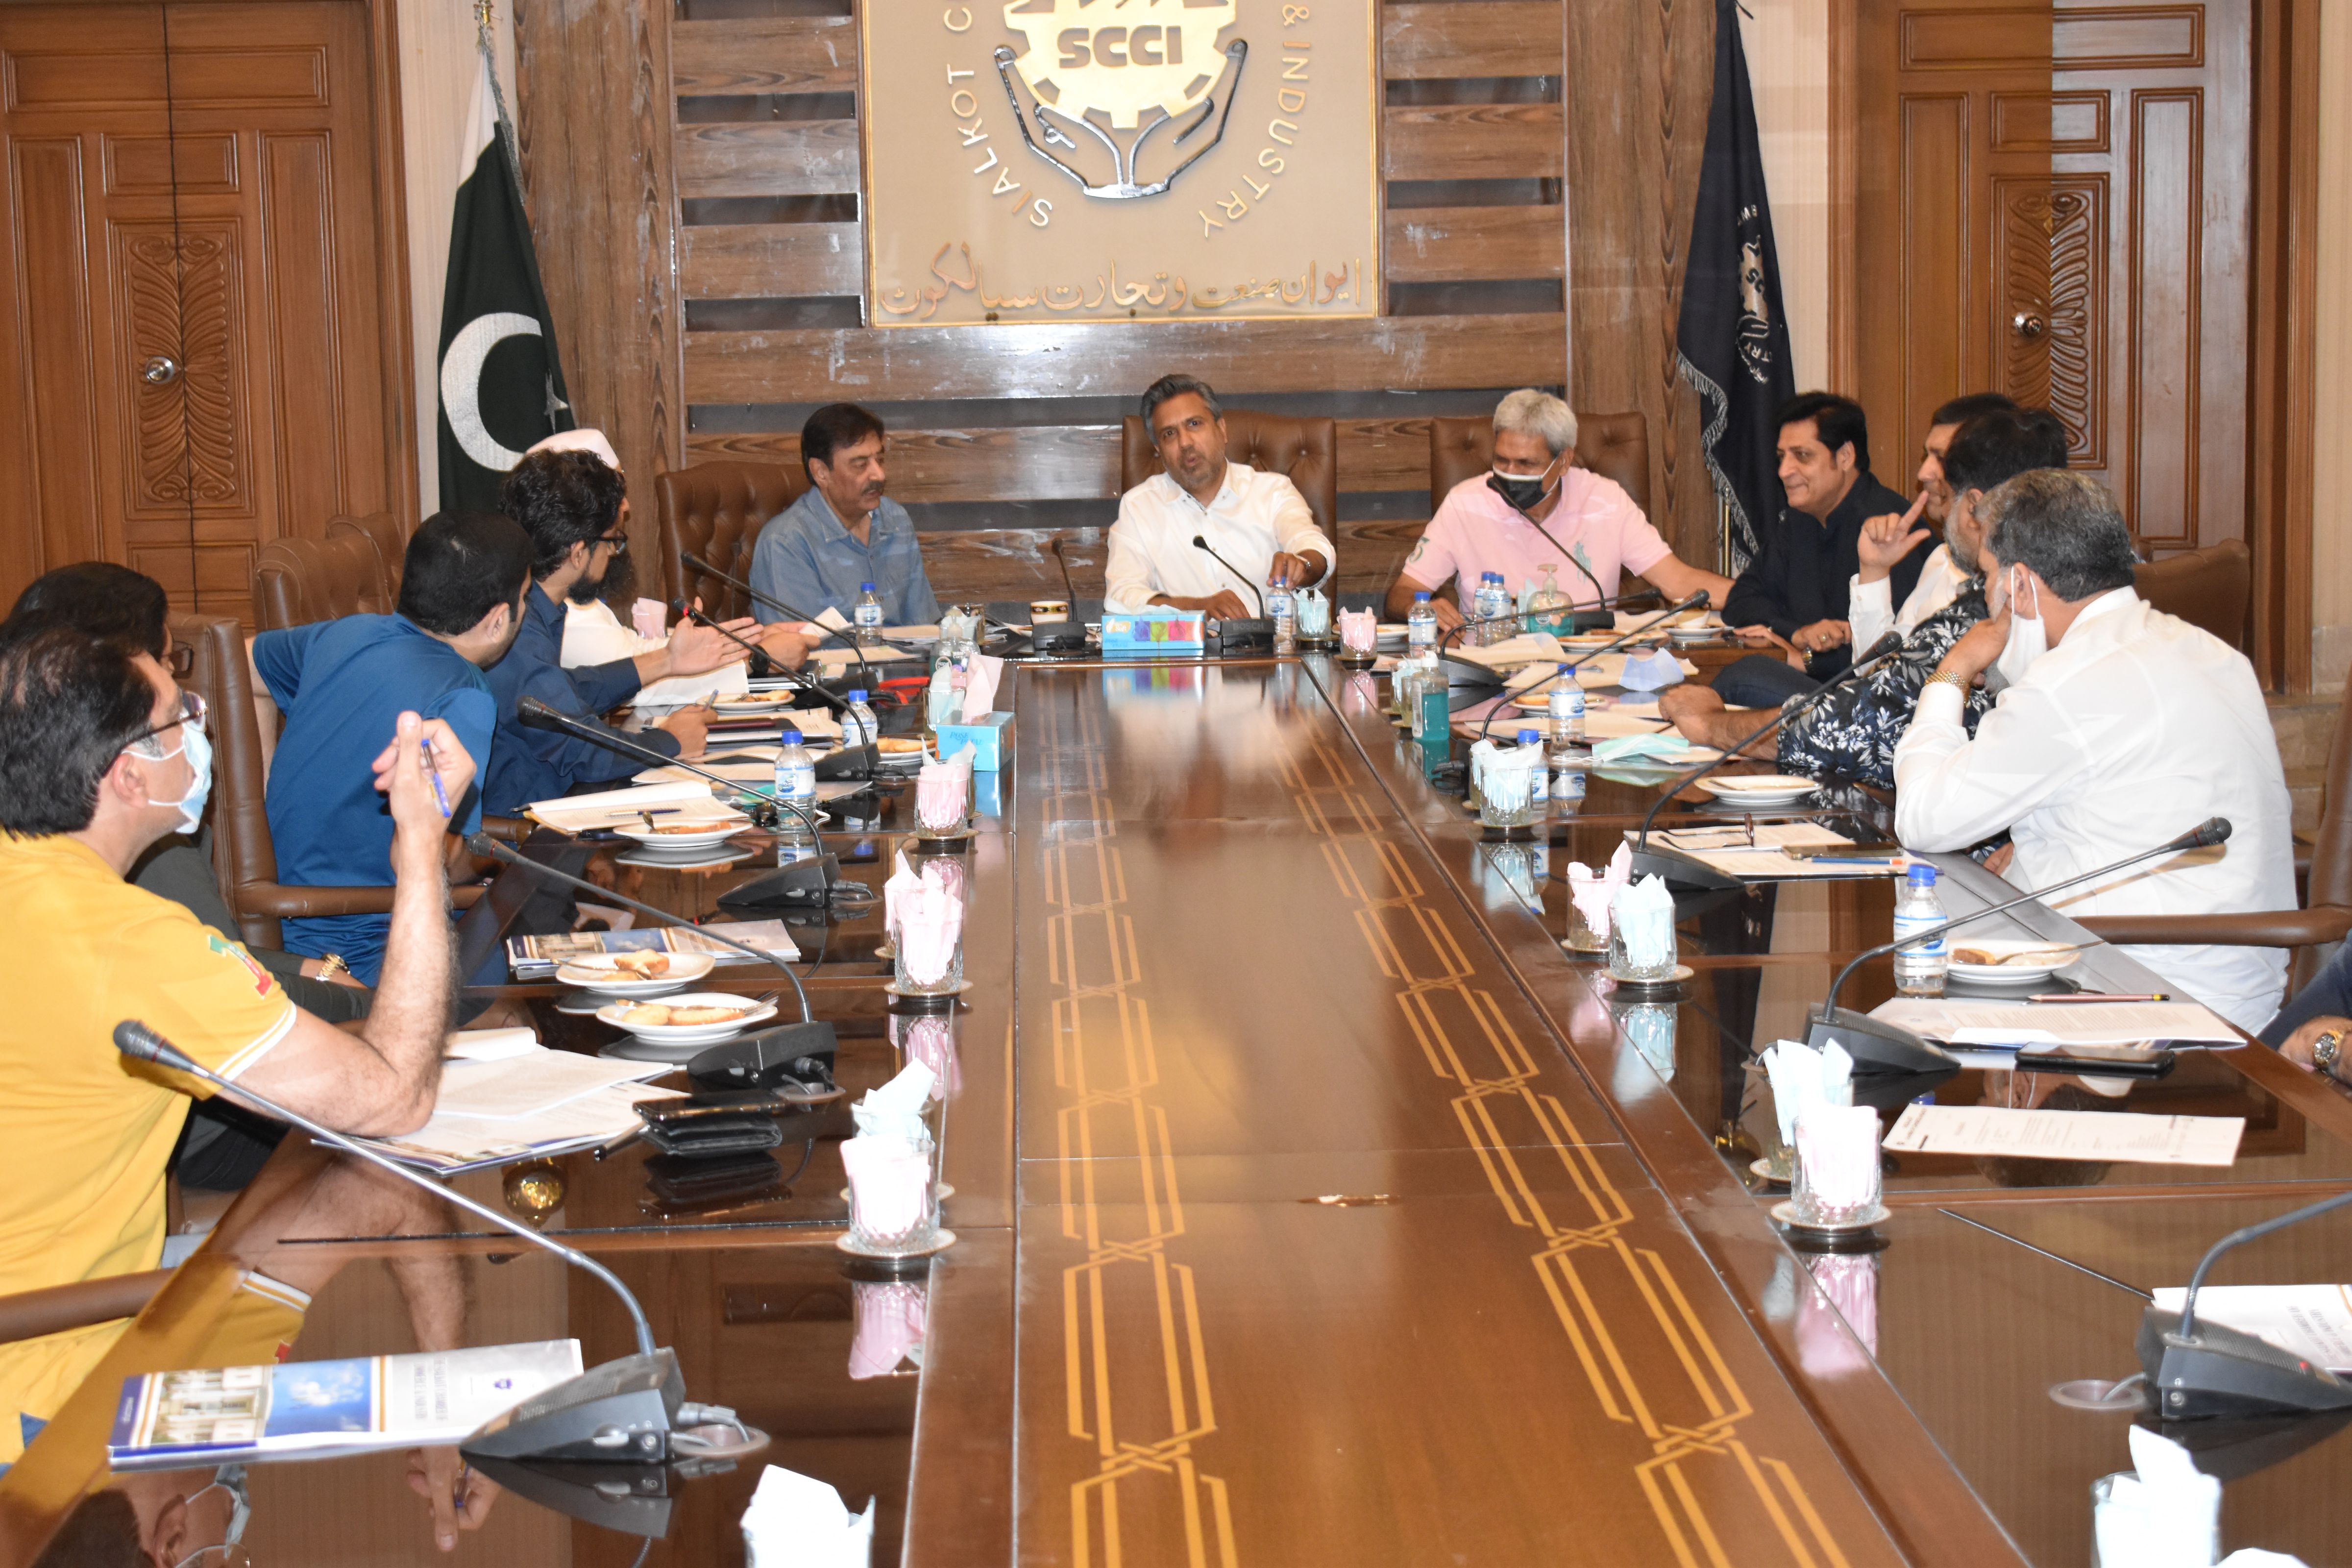 On May 26, 2021, Mr. Qaisar Iqbal Baryar chaired a meeting of Special Committee to consider Proposals regarding Exporter Facilitation Scheme. Mr. Fazal Jilani, Chairman AirSial, Mr. Khawar Anwar Khawaja and other senior members were present in the meeting.